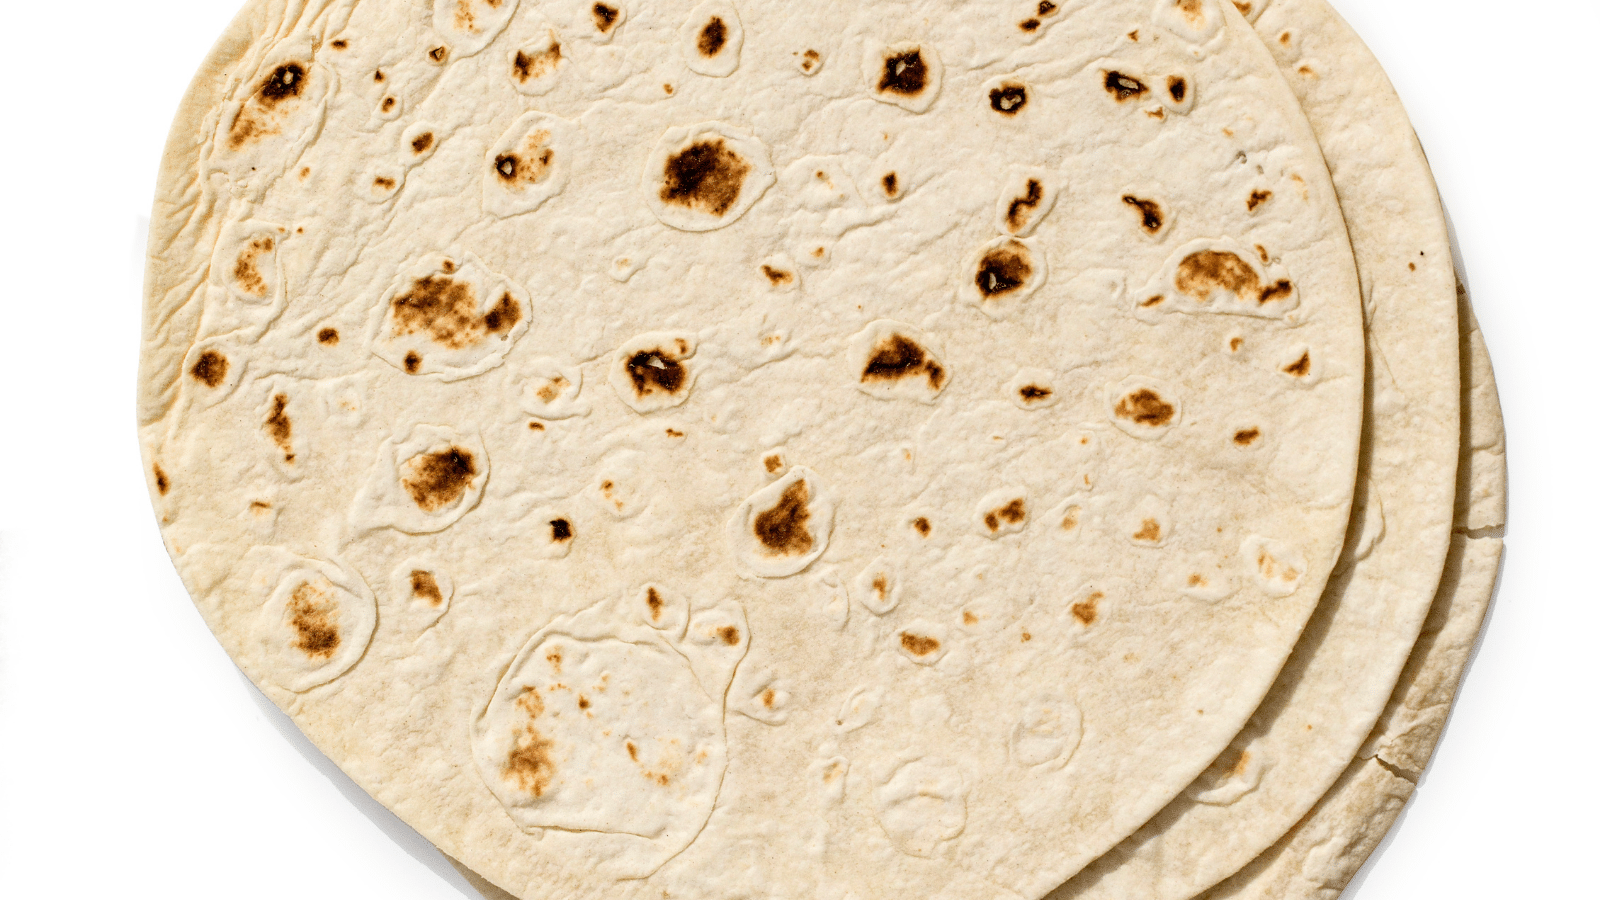 Store cooked sourdough tortillas in a tight container on the counter for a day or two or place them in the fridge.